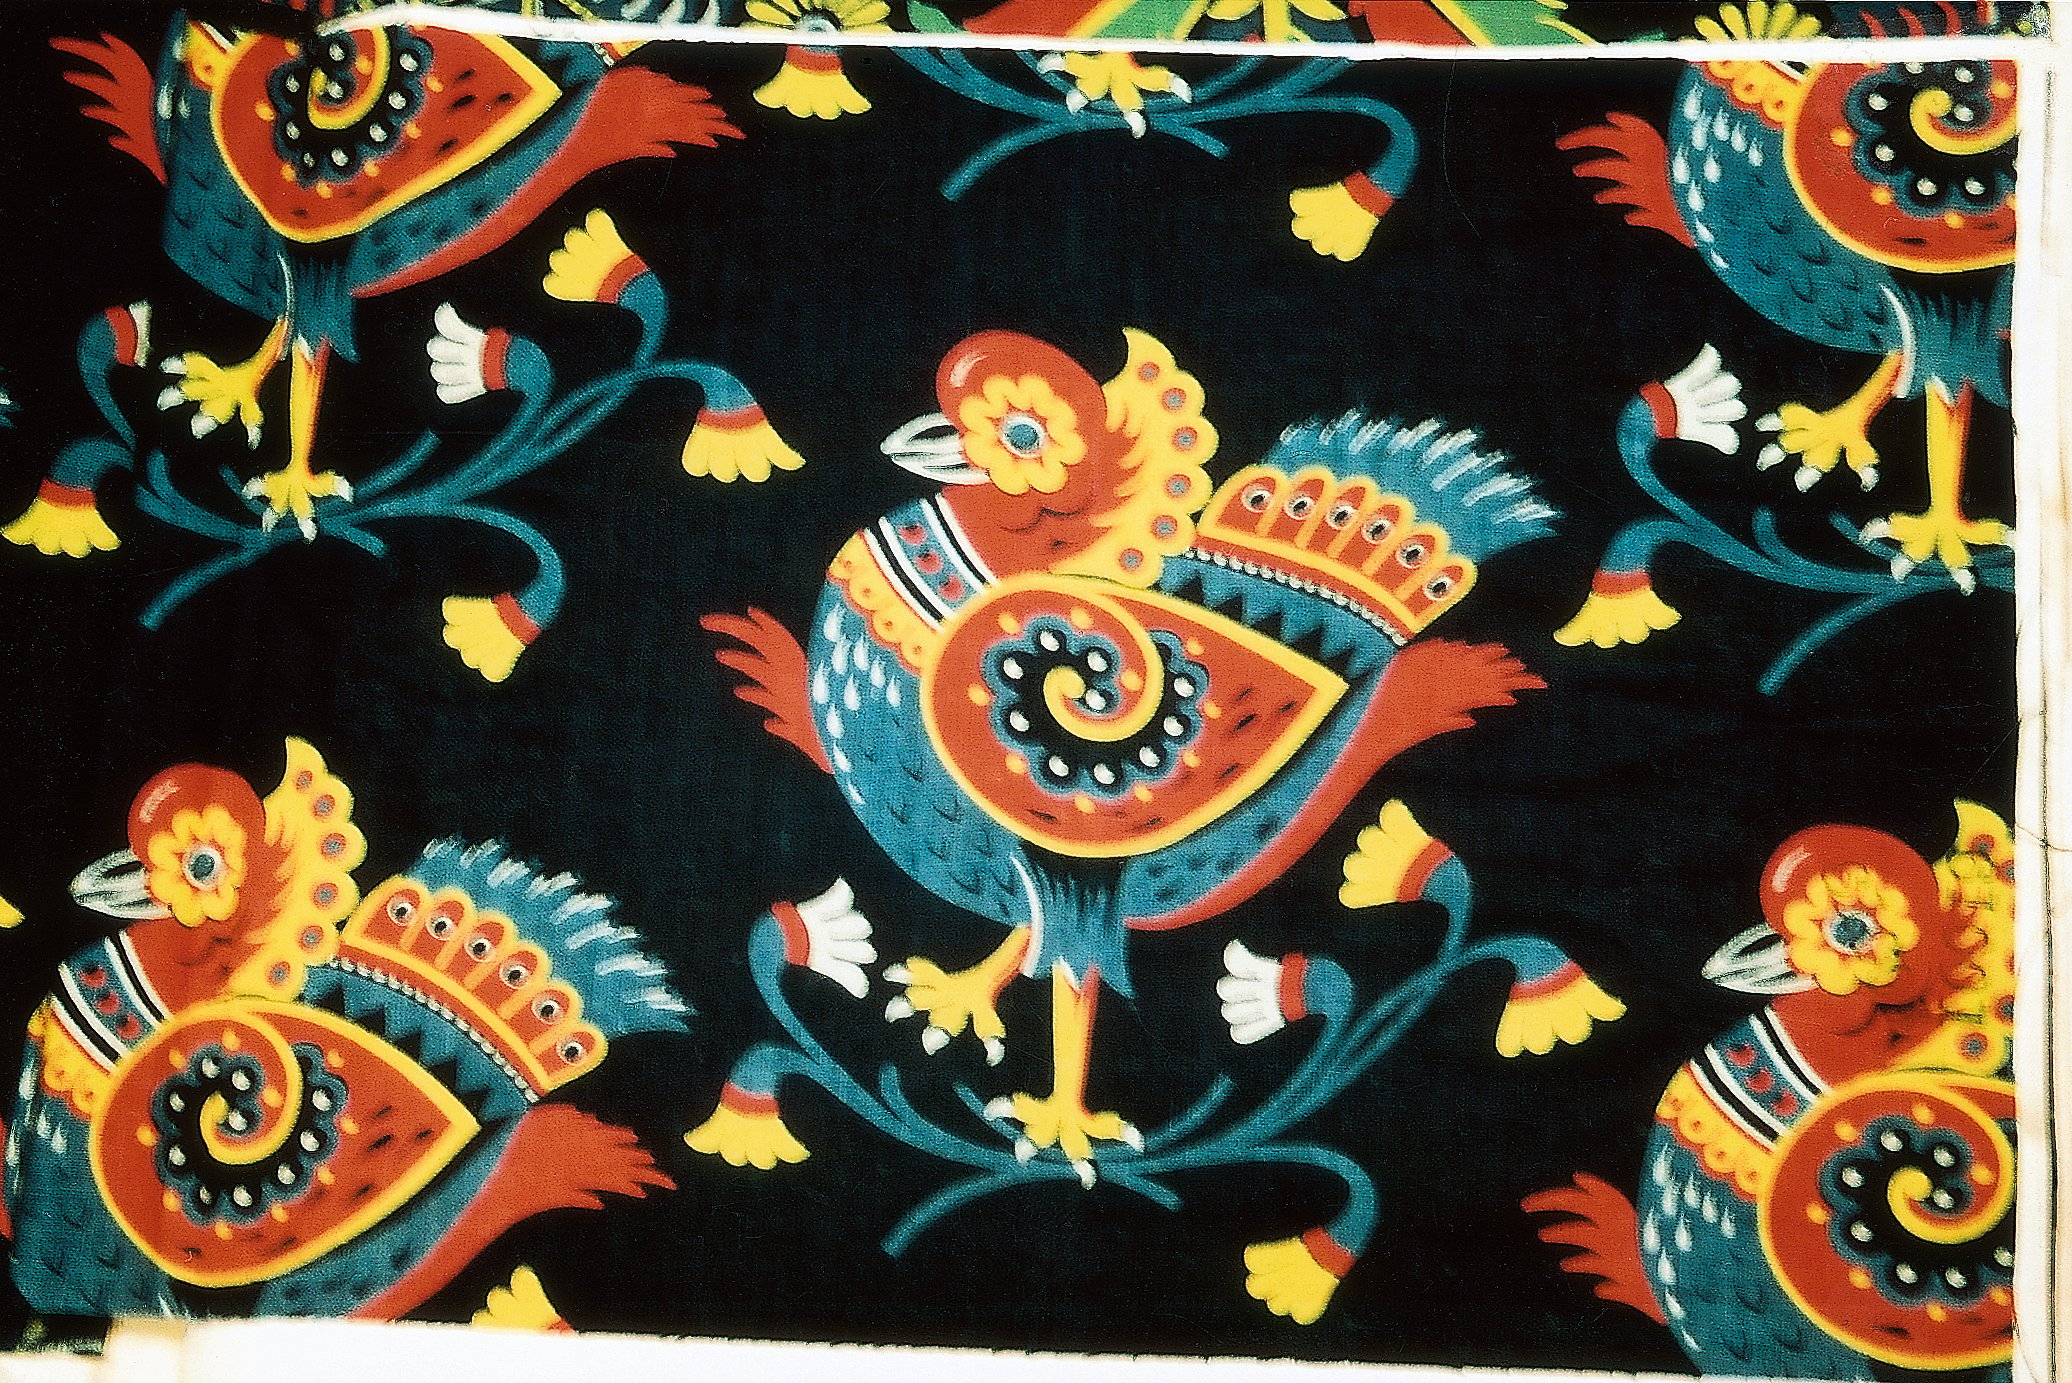 Arts and Crafts Christopher Dresser Peacock plumes print, on cover of 'Christopher Dresser Textiles', by ACC Art Books.